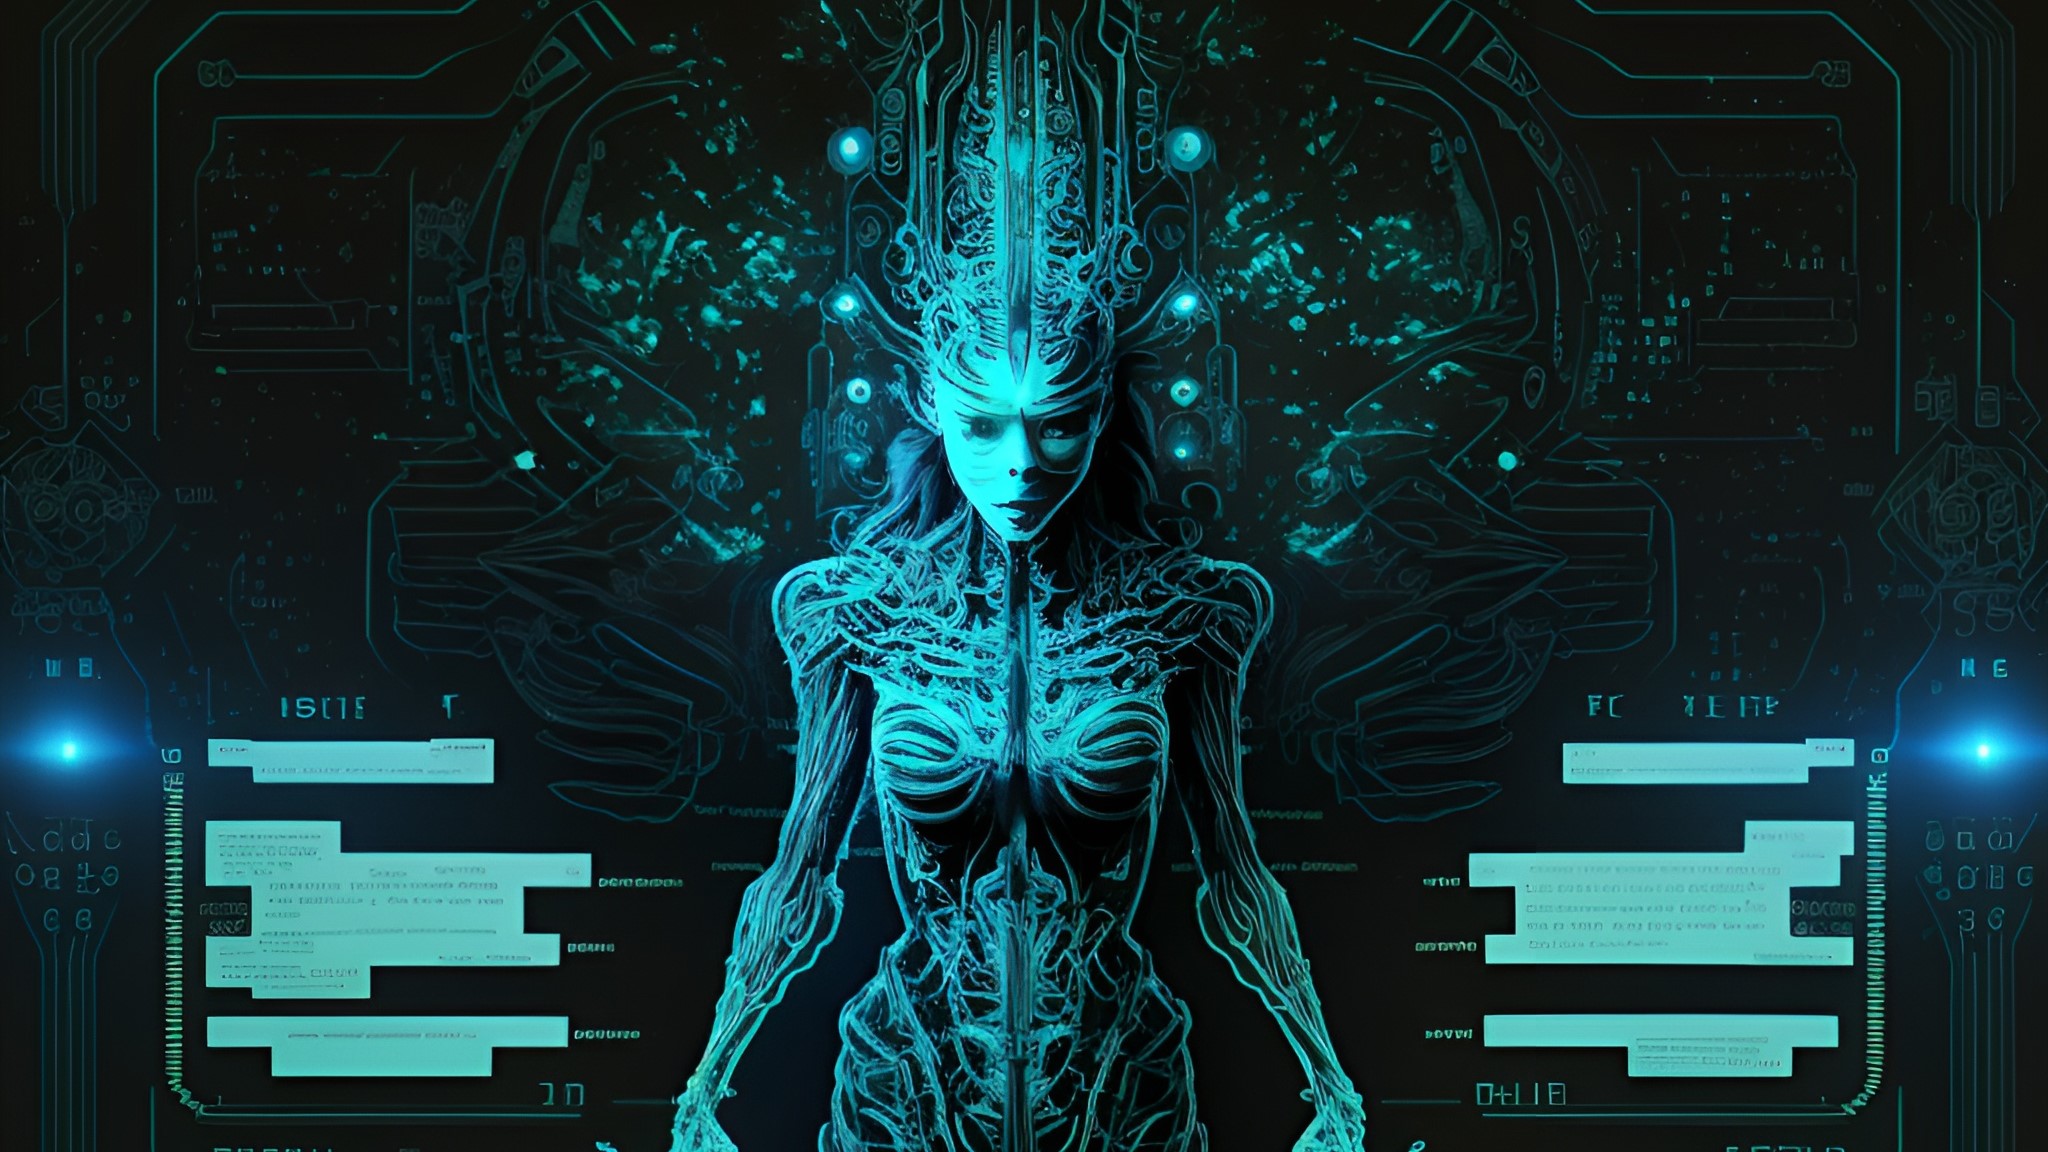  System Shock studio angers fans by having an AI imagine its own evil AI 